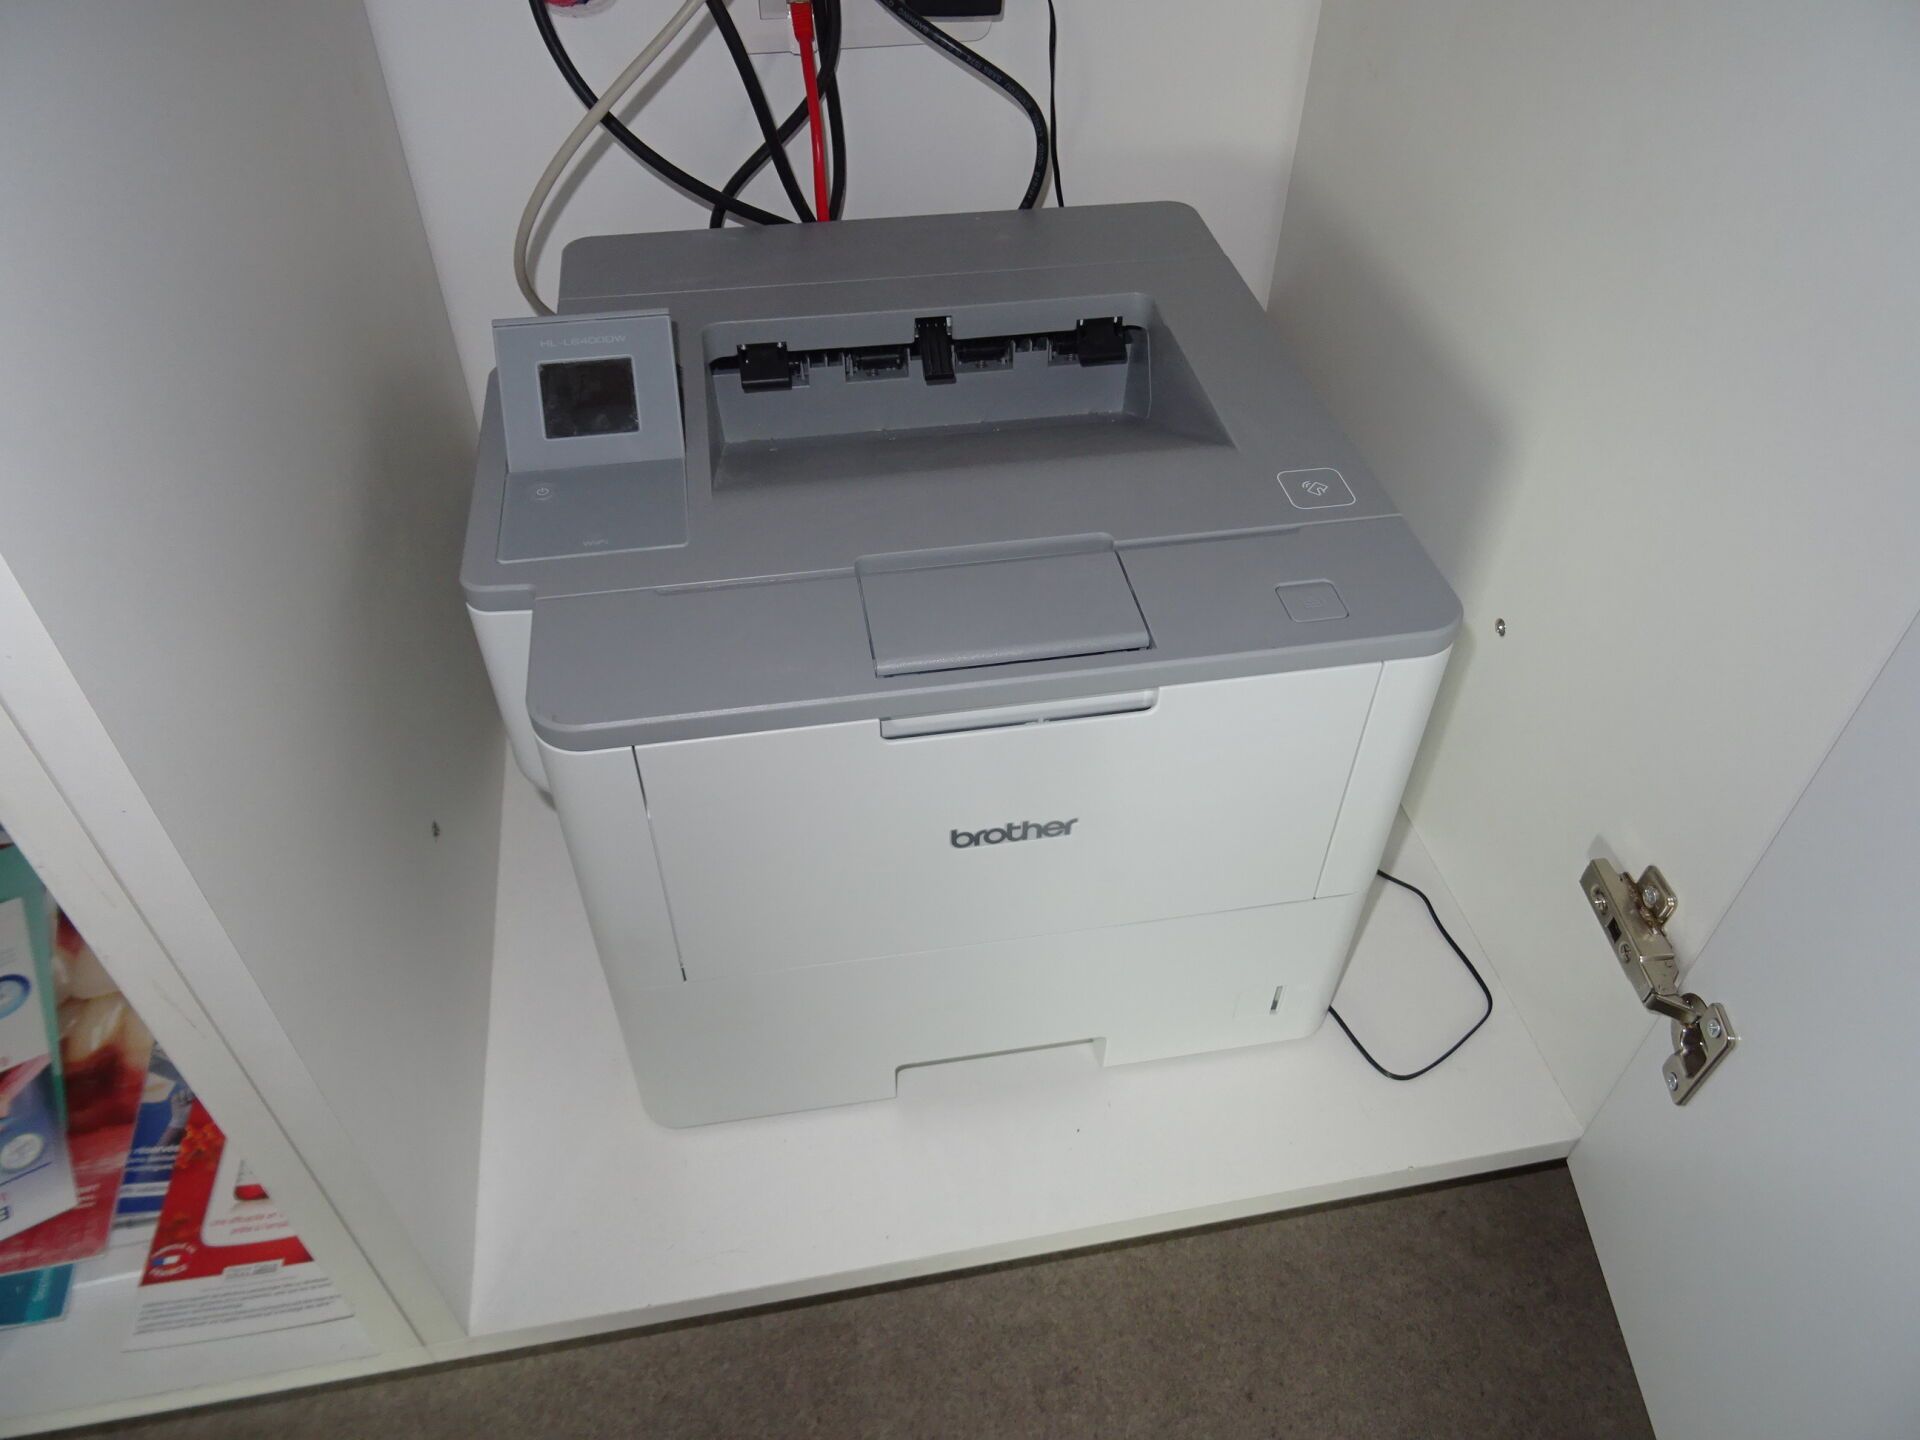 Null 1 Brother L6400DW printer